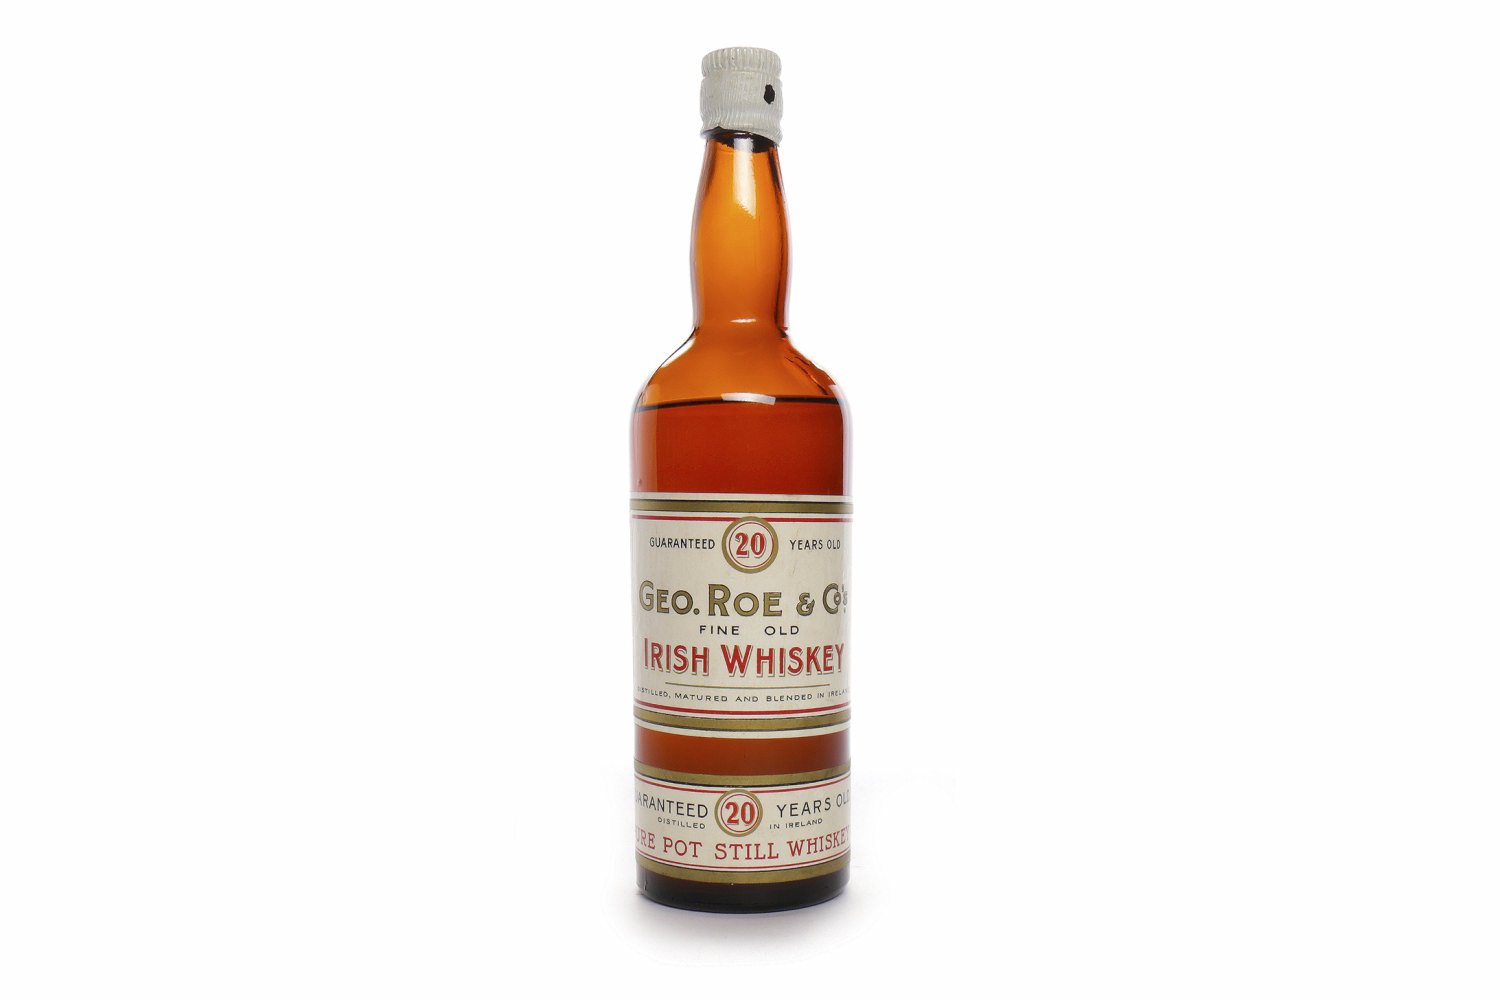 George Roe and Co Irish whisky sells at auction for £3600